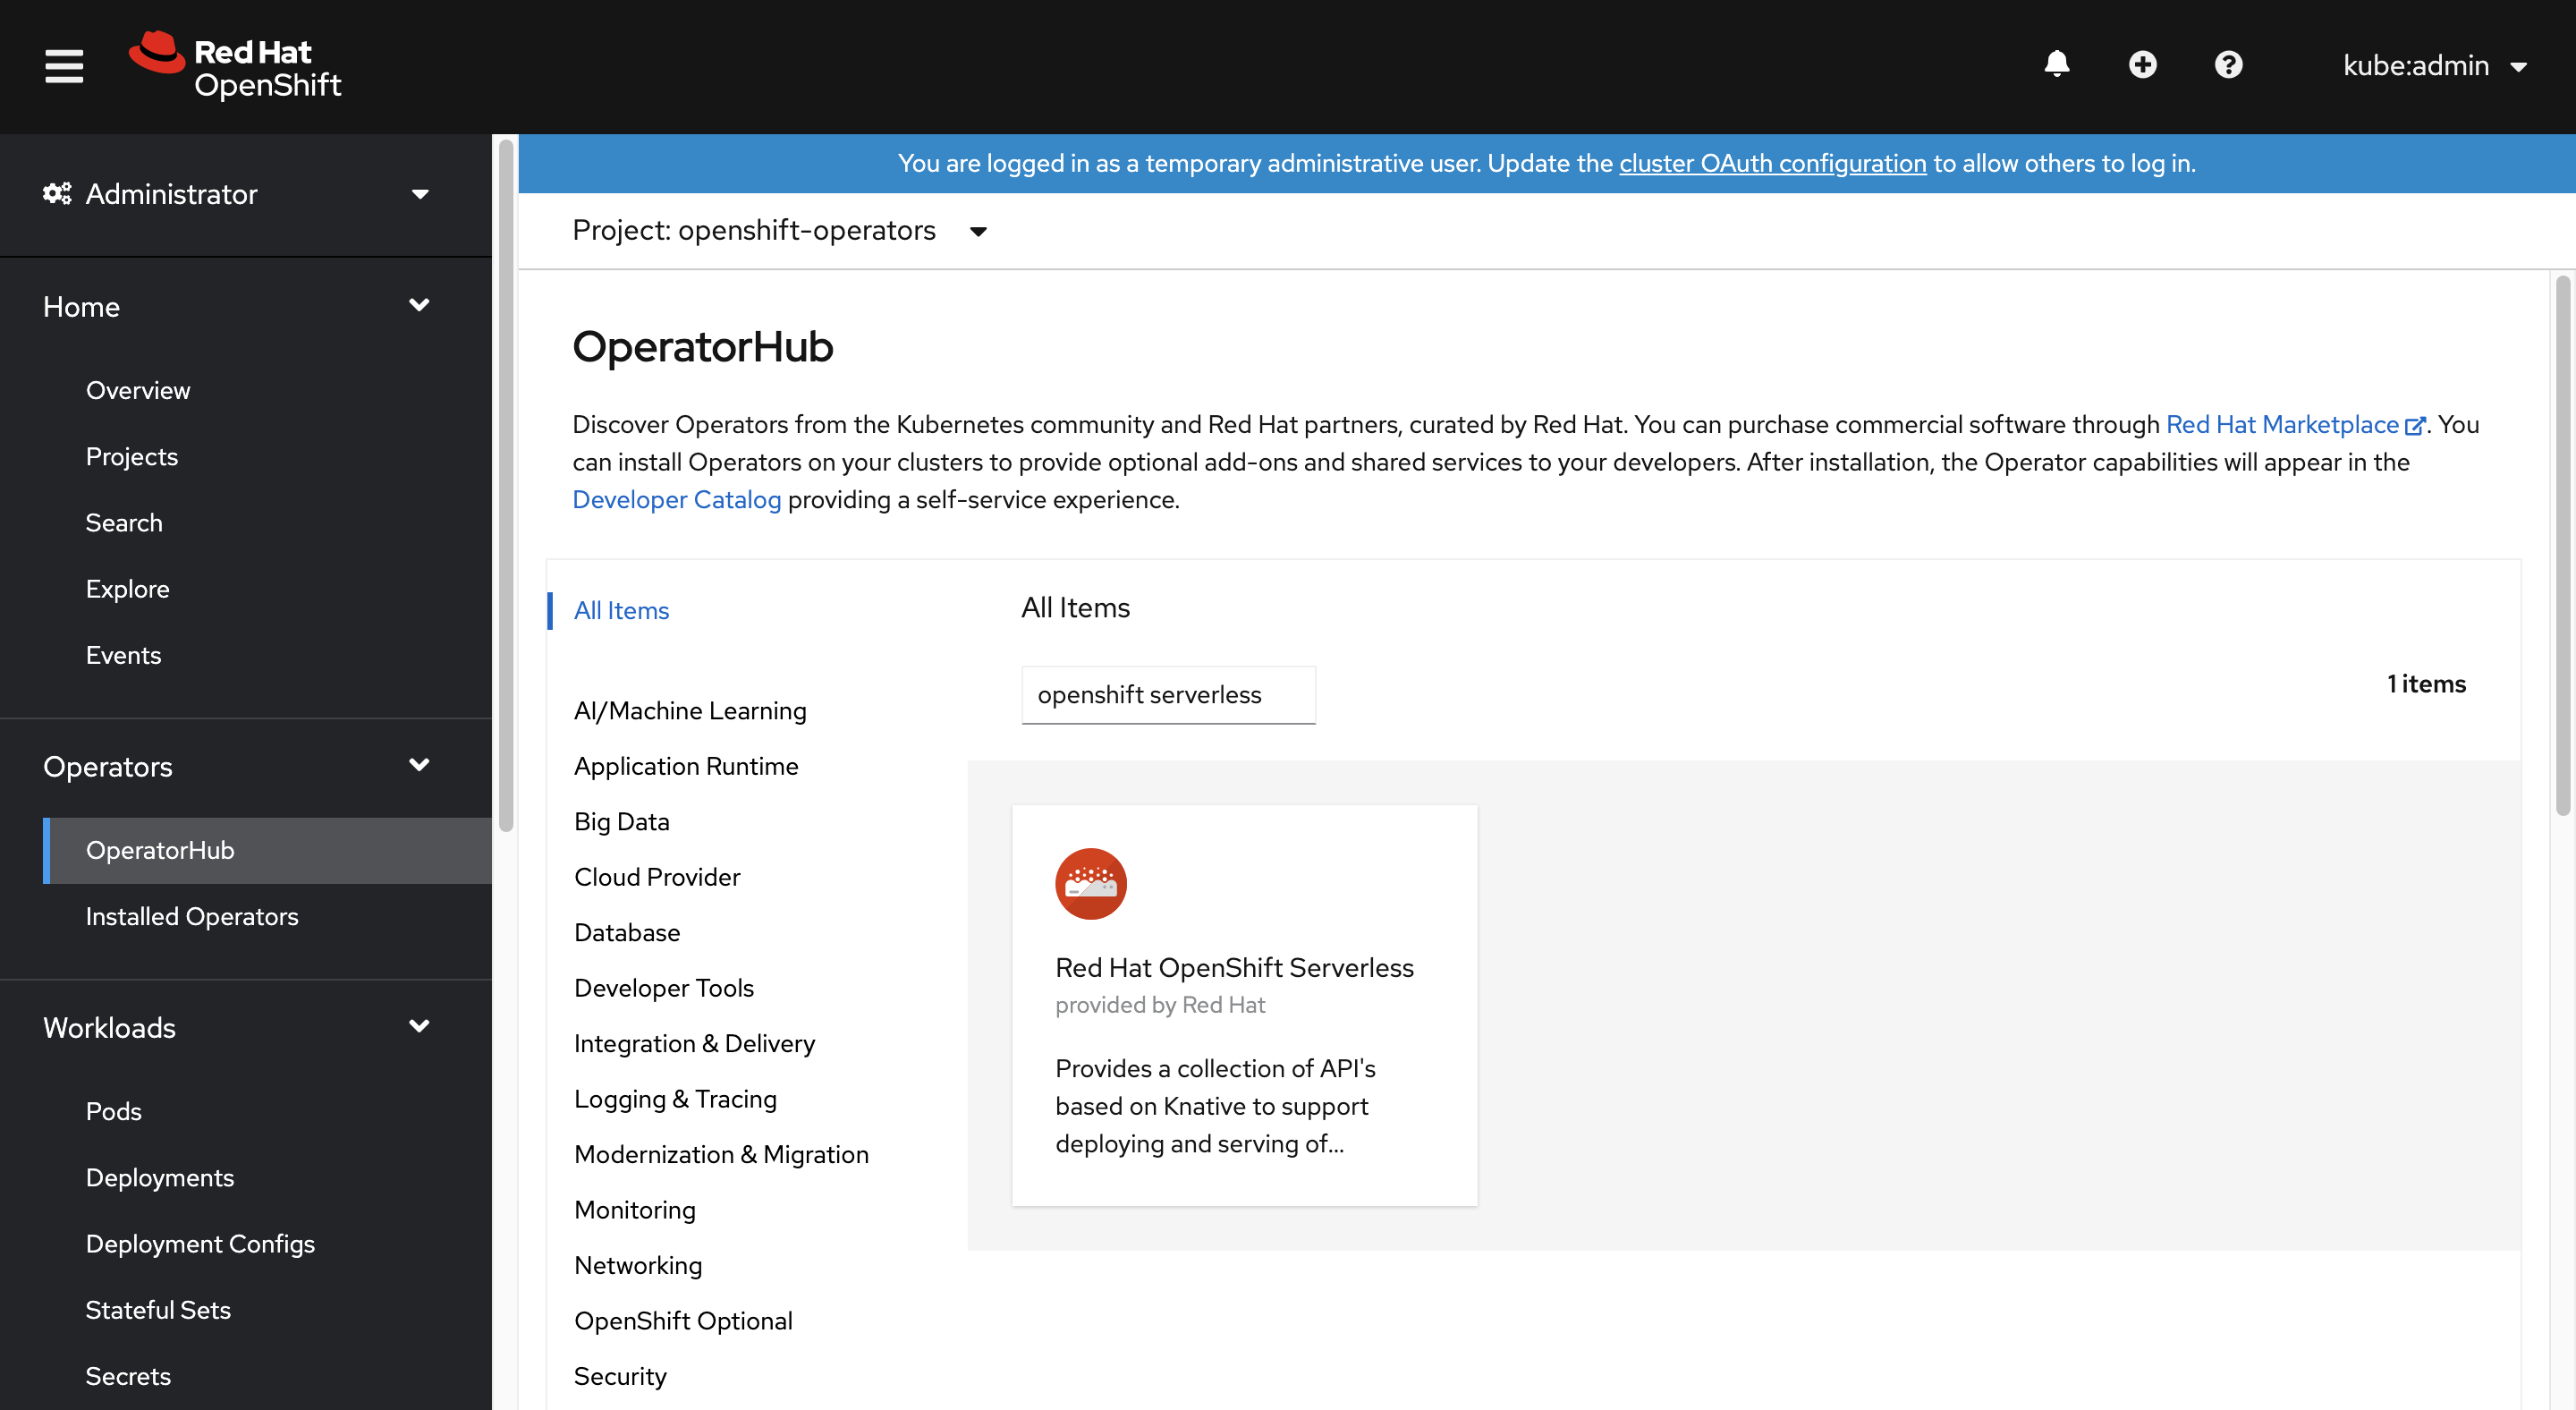 A screenshot that shows the position of the OpenShift Serverless operator.